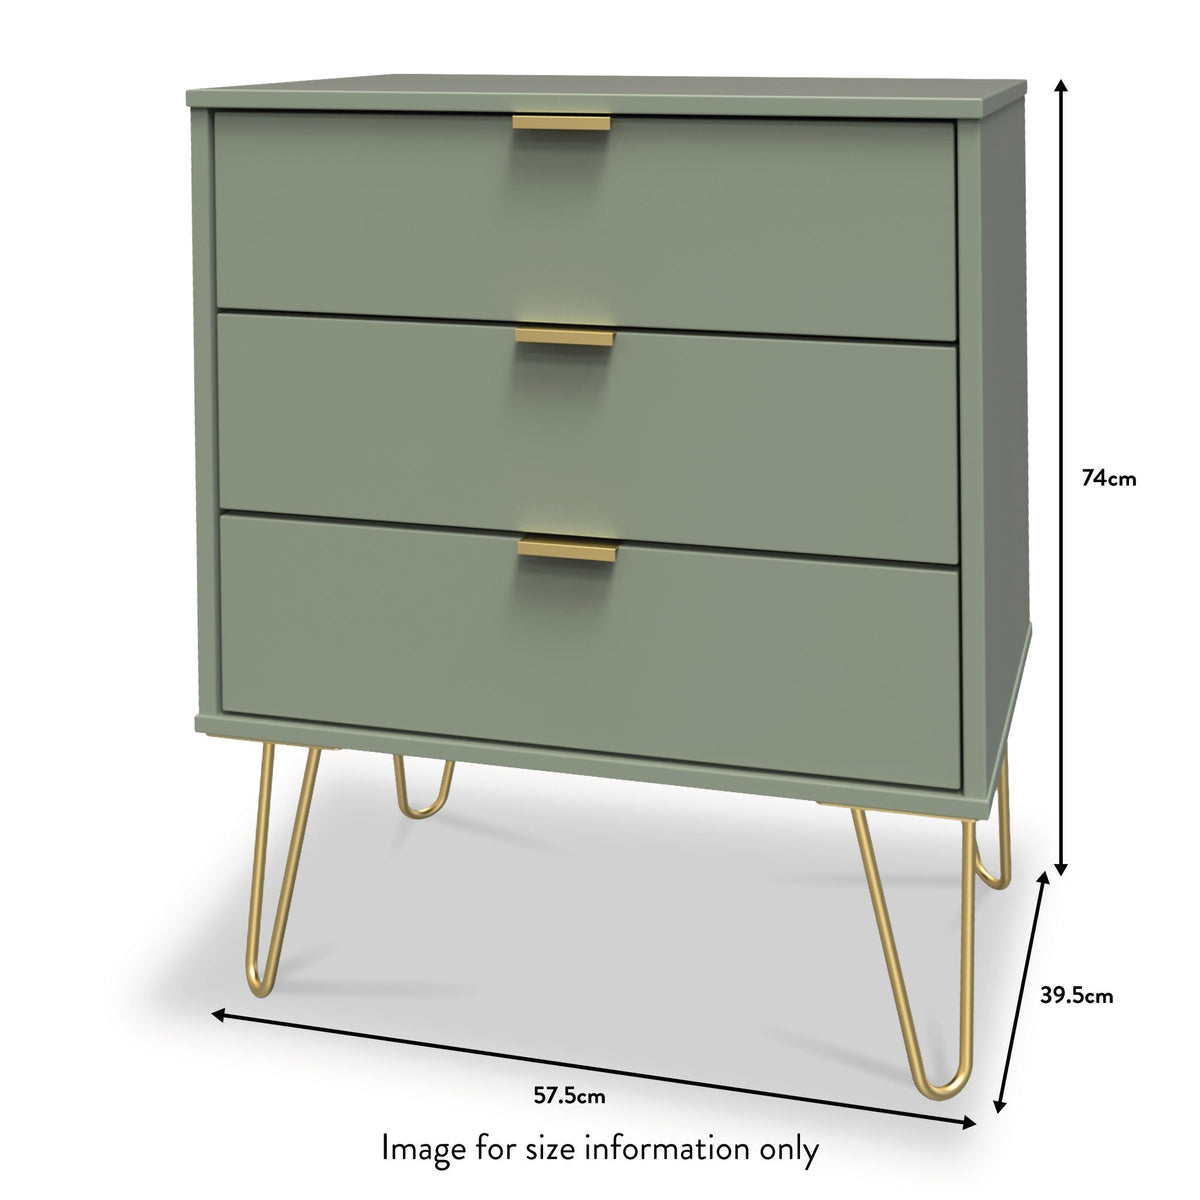 Moreno Olive Green 3 Drawer Midi Chest of Drawers Unit with gold hairpin legs dimensions guide